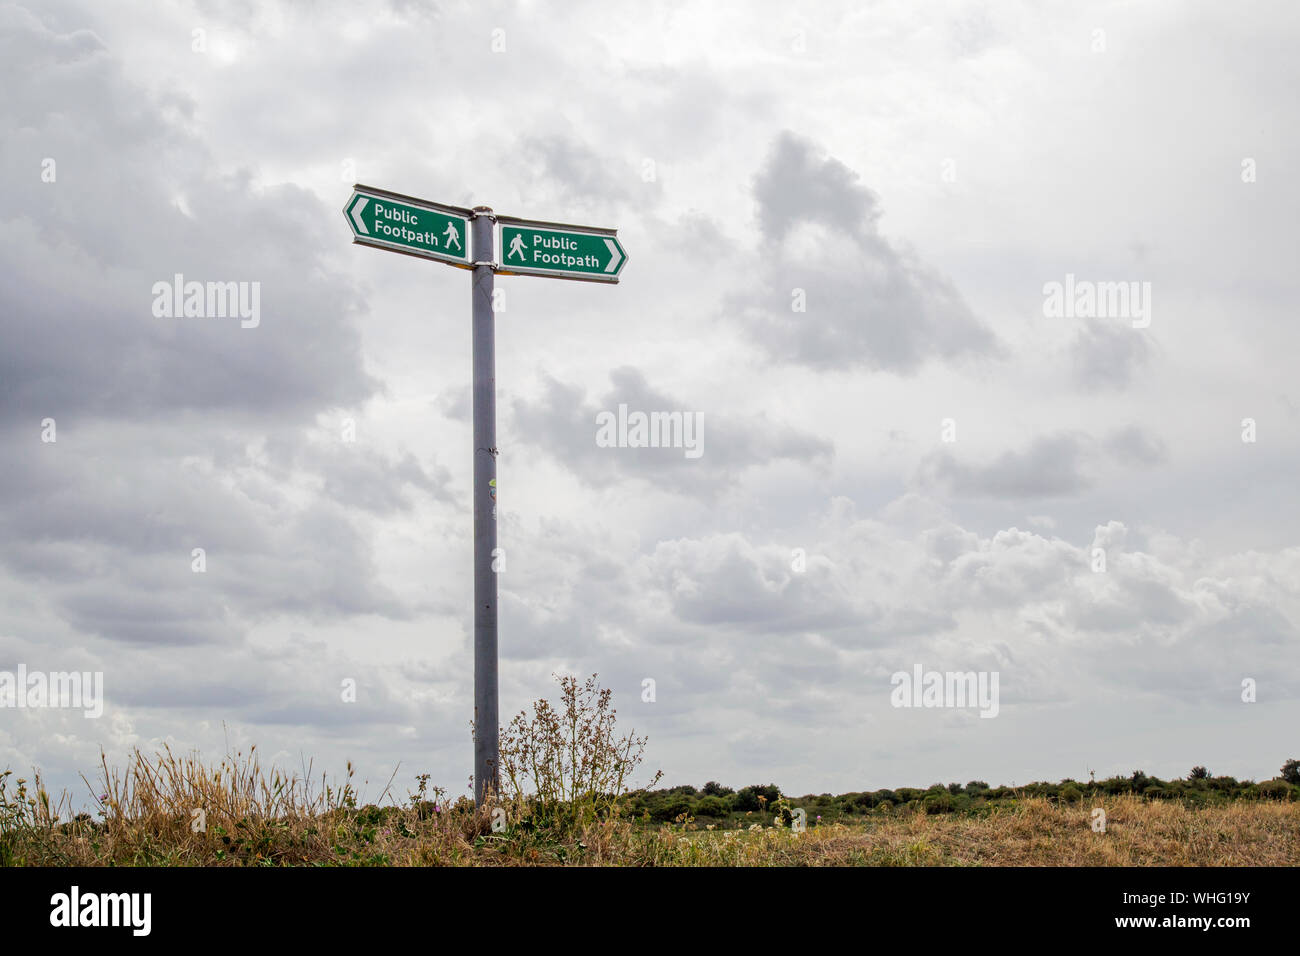 A green Public footpath sign with two branches Stock Photo